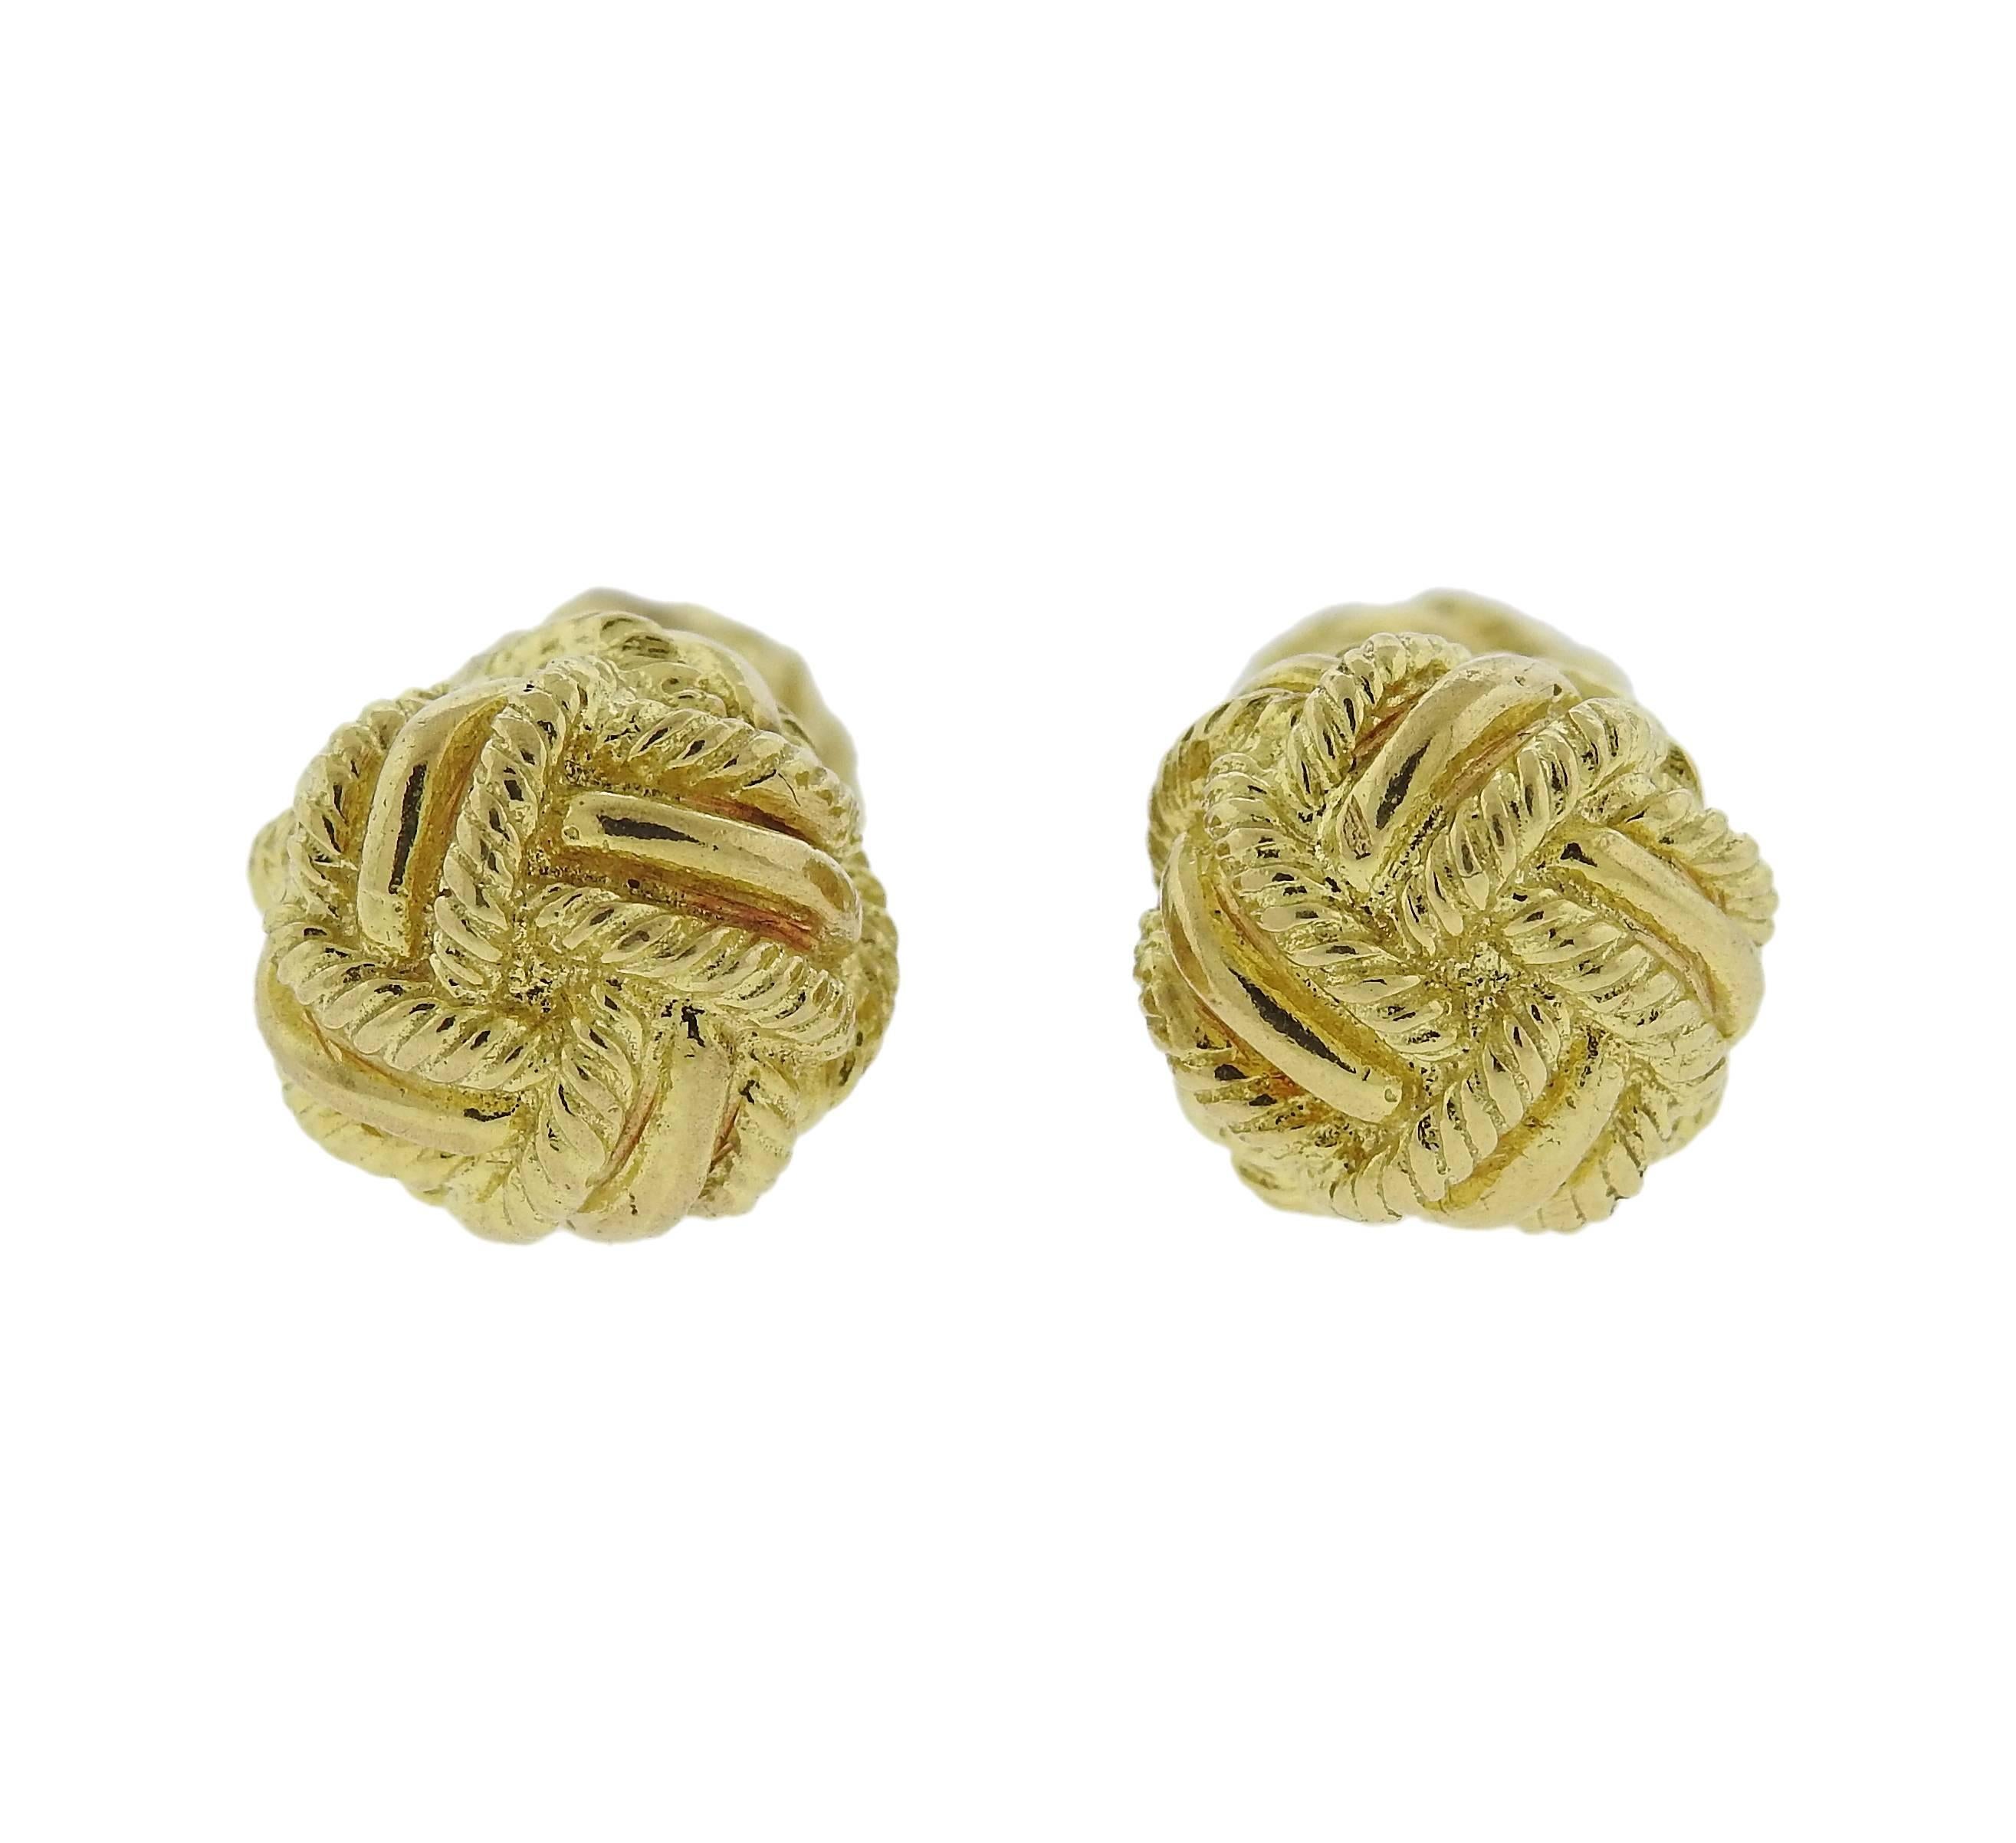 Pair of classic woven knot cufflinks, crafted by Tiffany & Co in 18k yellow gold. Cufflink top - 11.5mm in diameter, back - 9mm. Marked: Tiffany & Co, 18k. Weight - 30.3 grams 